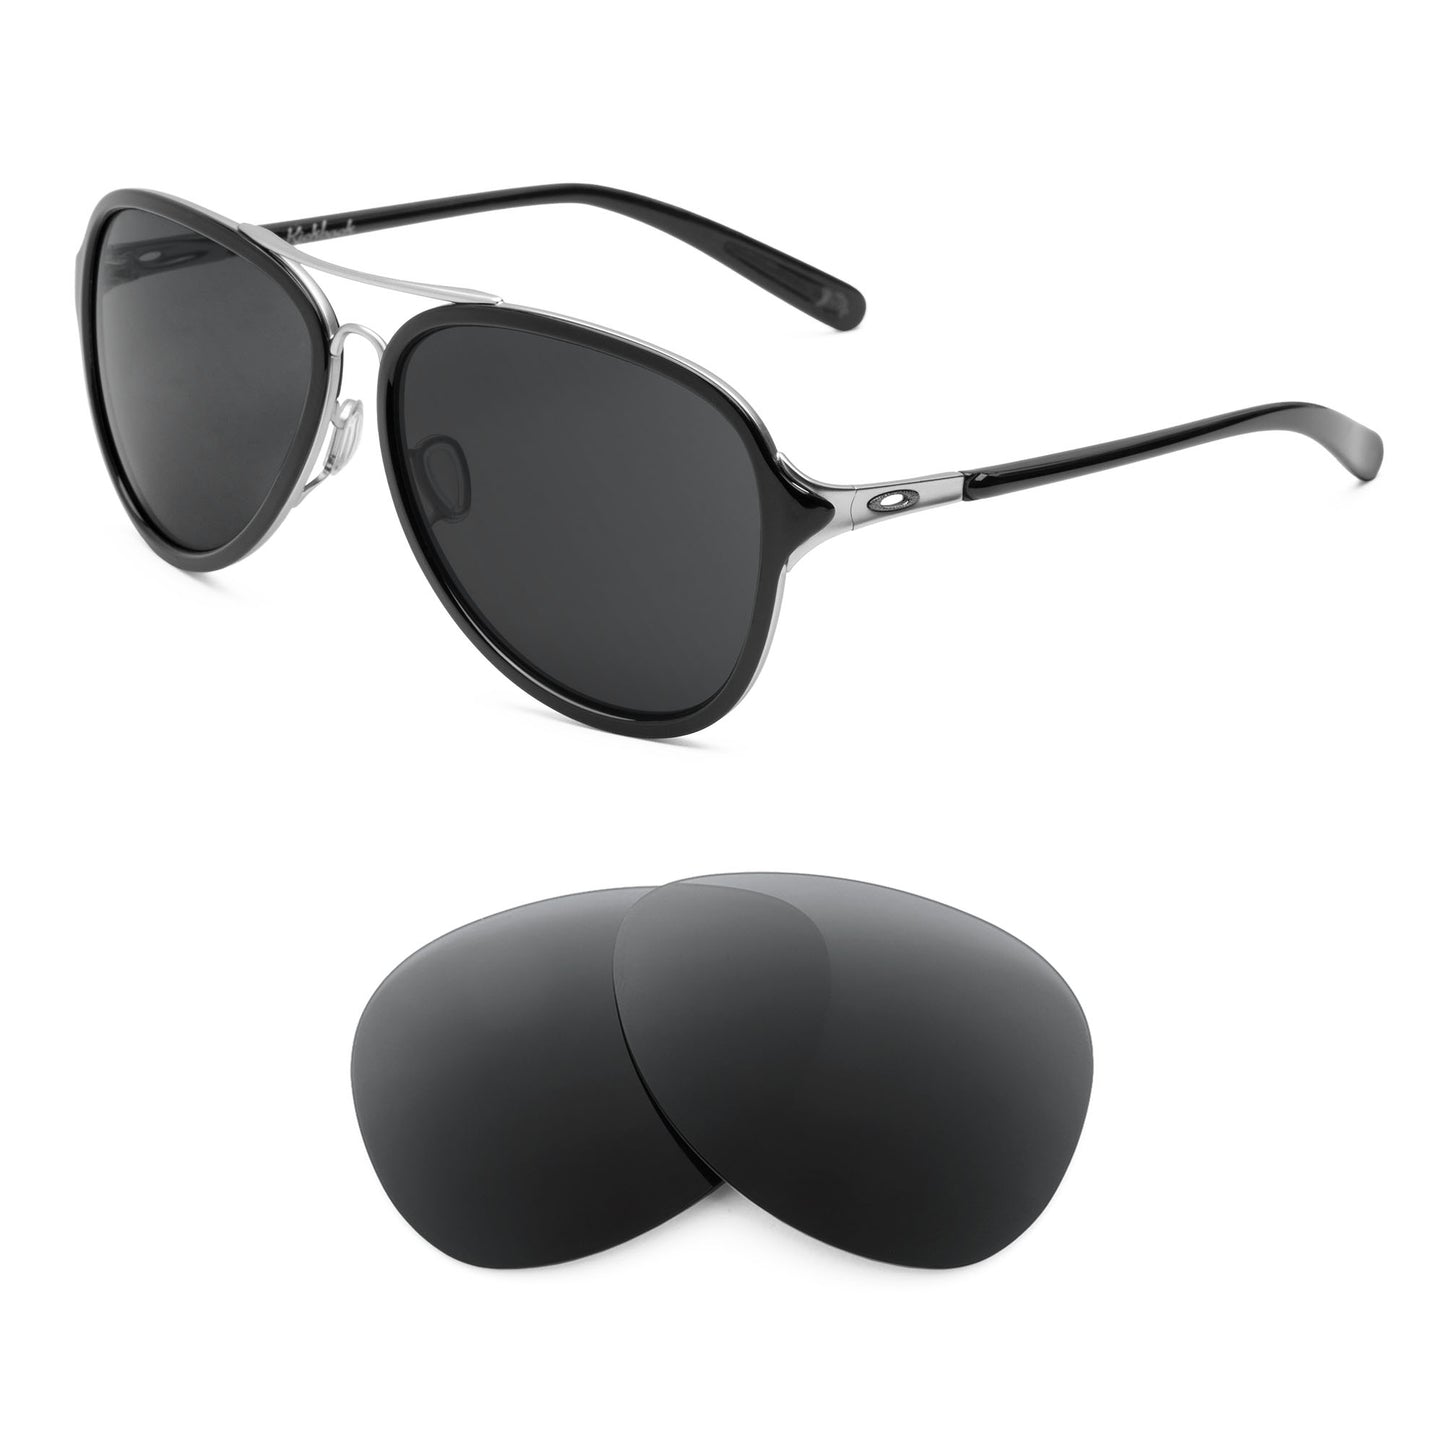 Oakley Kickback sunglasses with replacement lenses